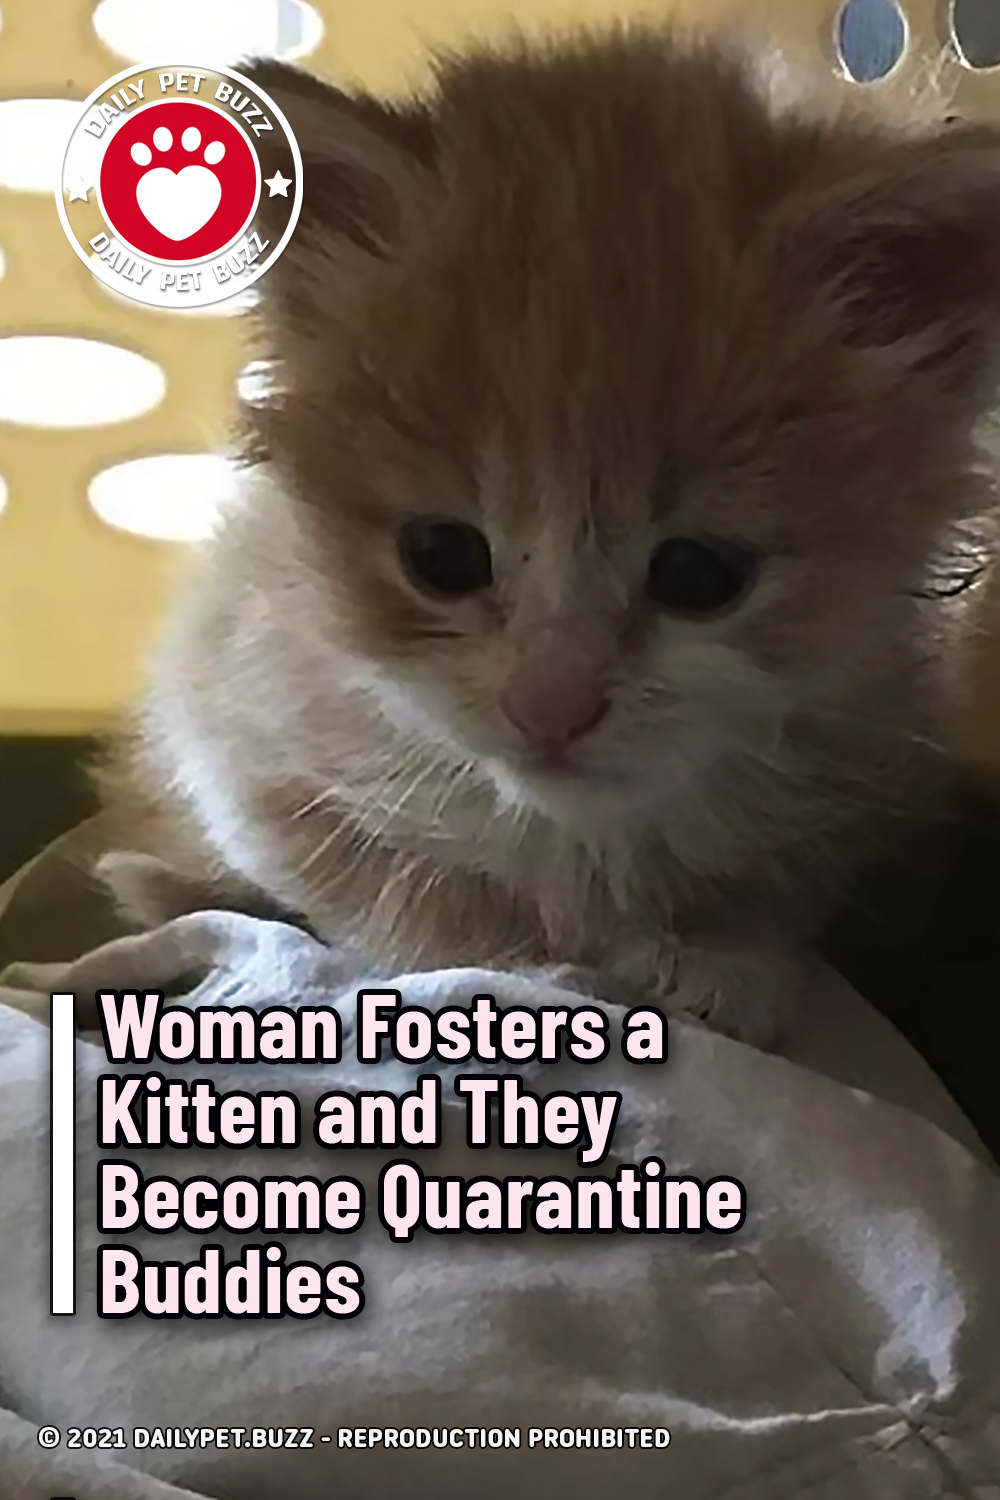 Woman Fosters a Kitten and They Become Quarantine Buddies